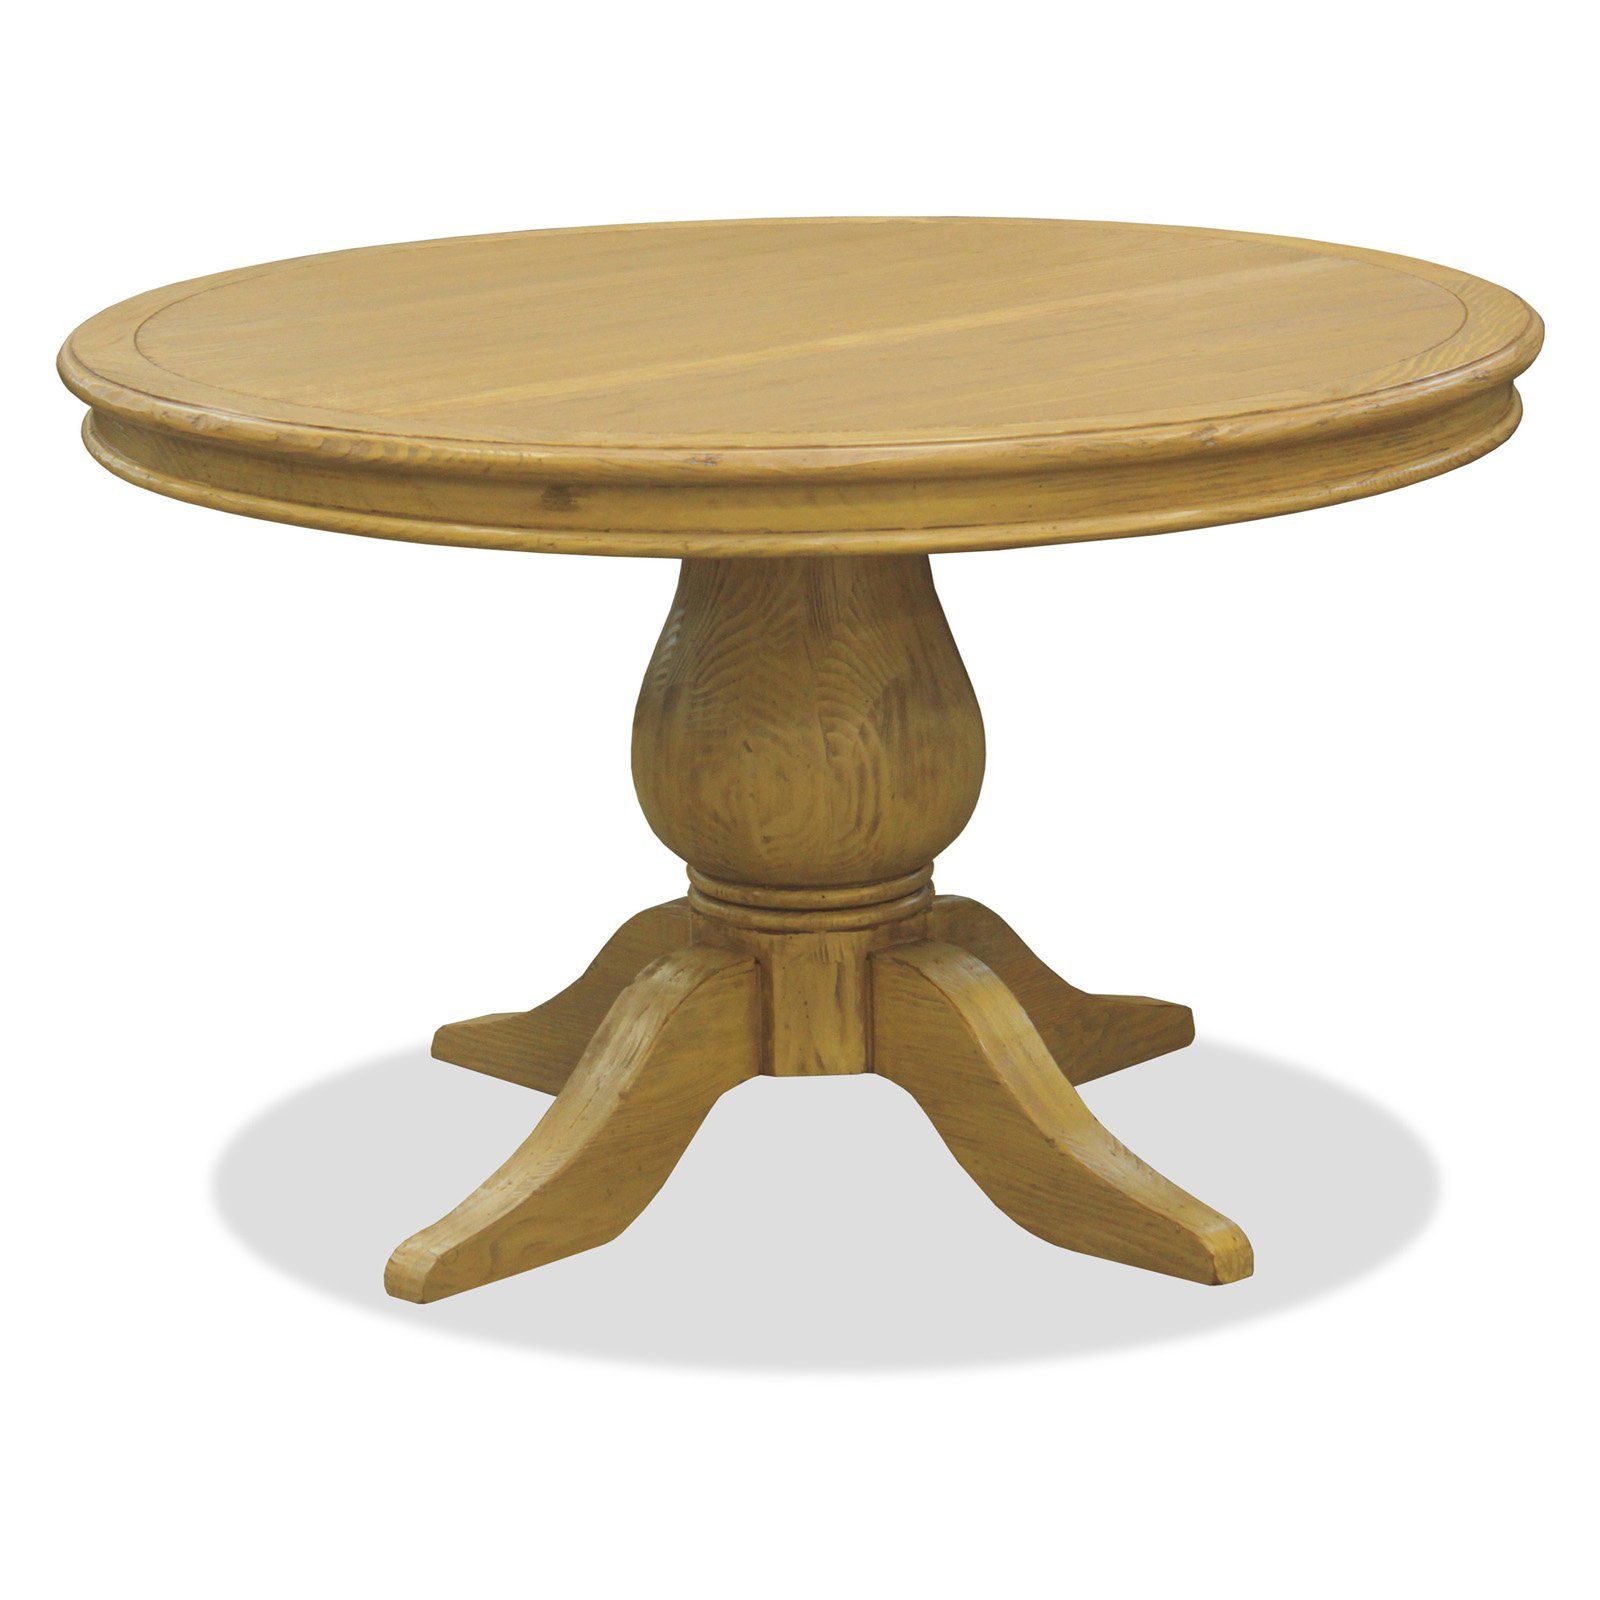 Well Liked South Cone California Round Pedestal Dining Table For Corvena 48'' Pedestal Dining Tables (View 8 of 20)